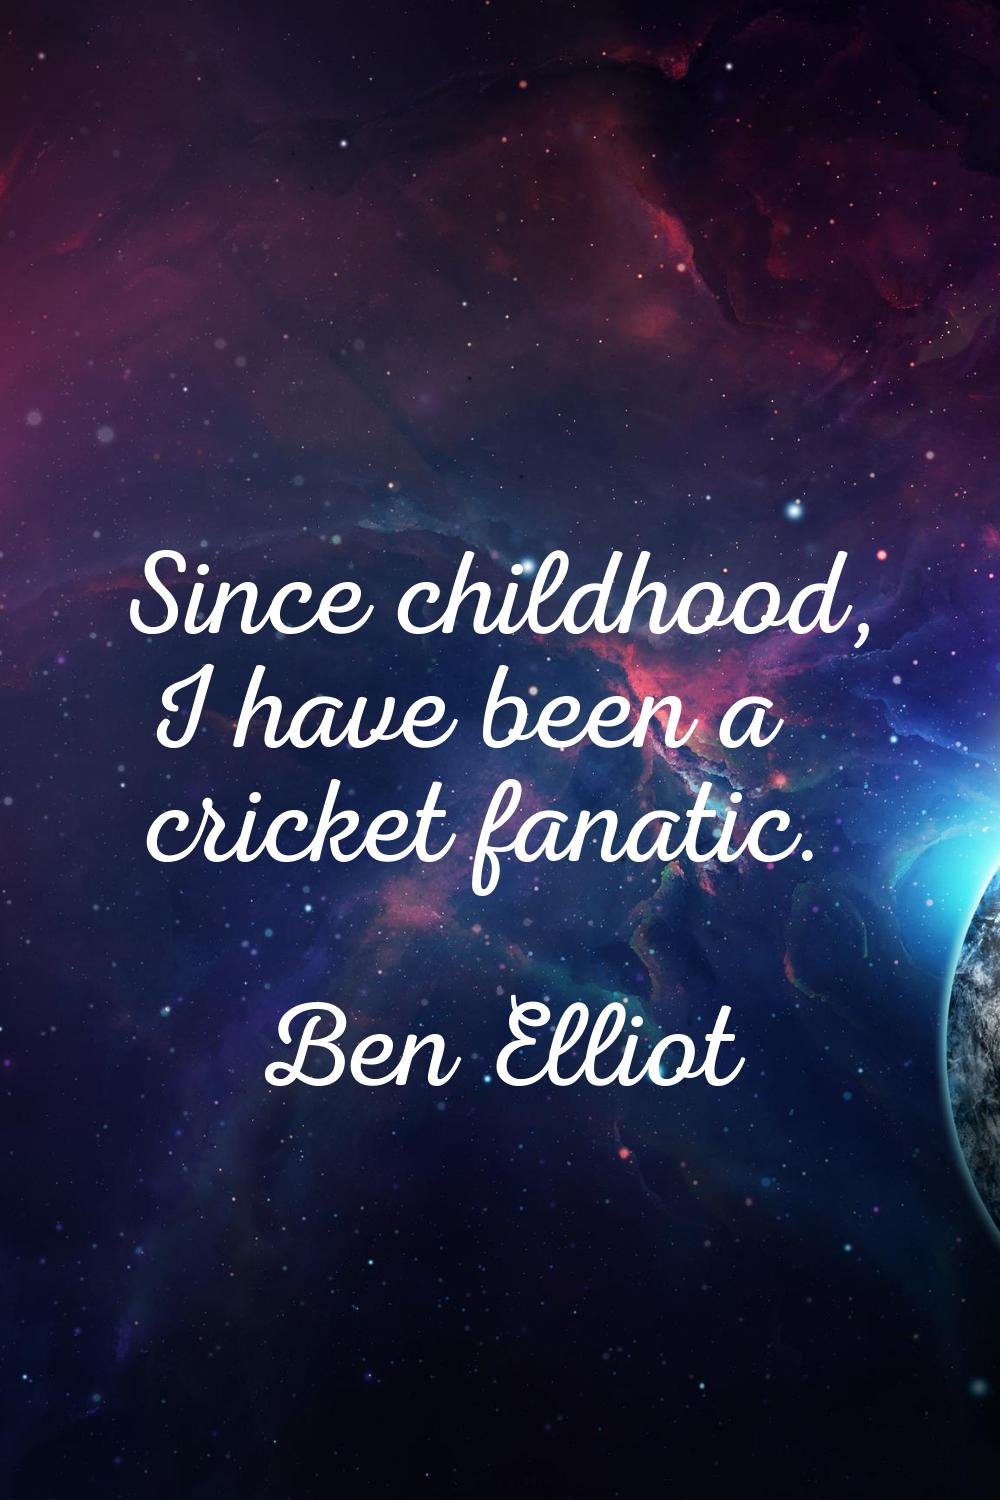 Since childhood, I have been a cricket fanatic.